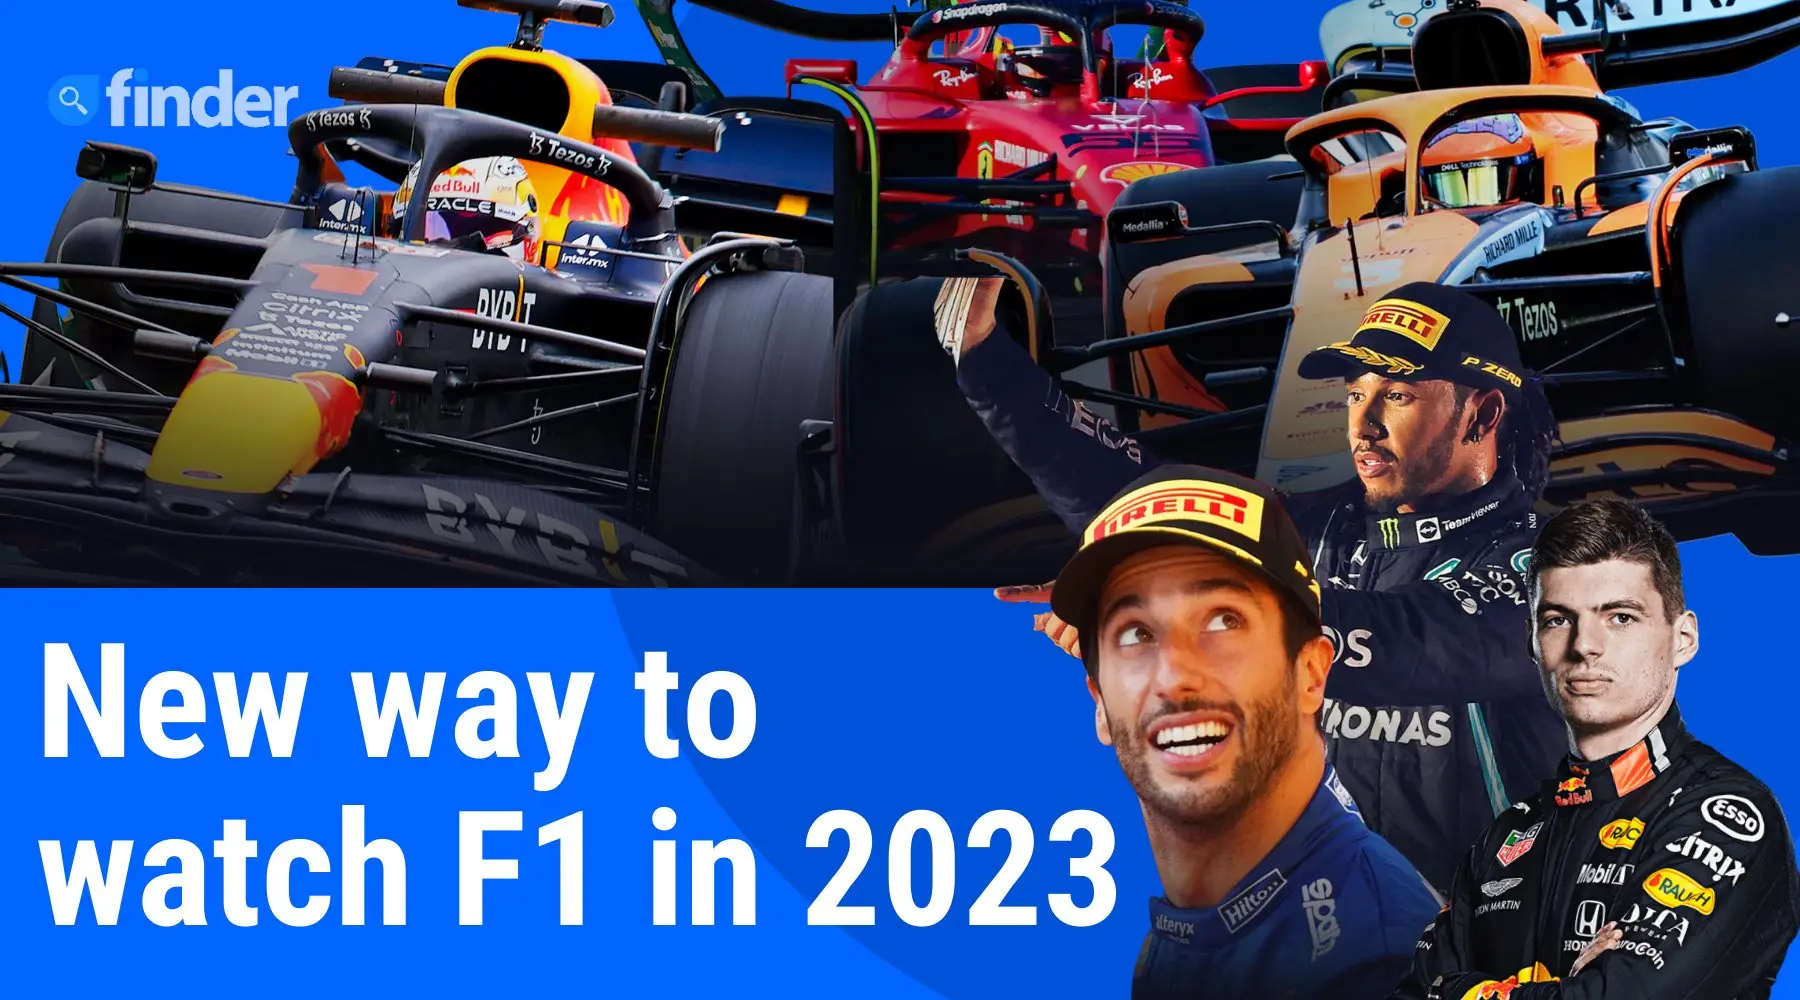 F1 TV Pro in Australia Big changes coming to Formula 1 broadcasts